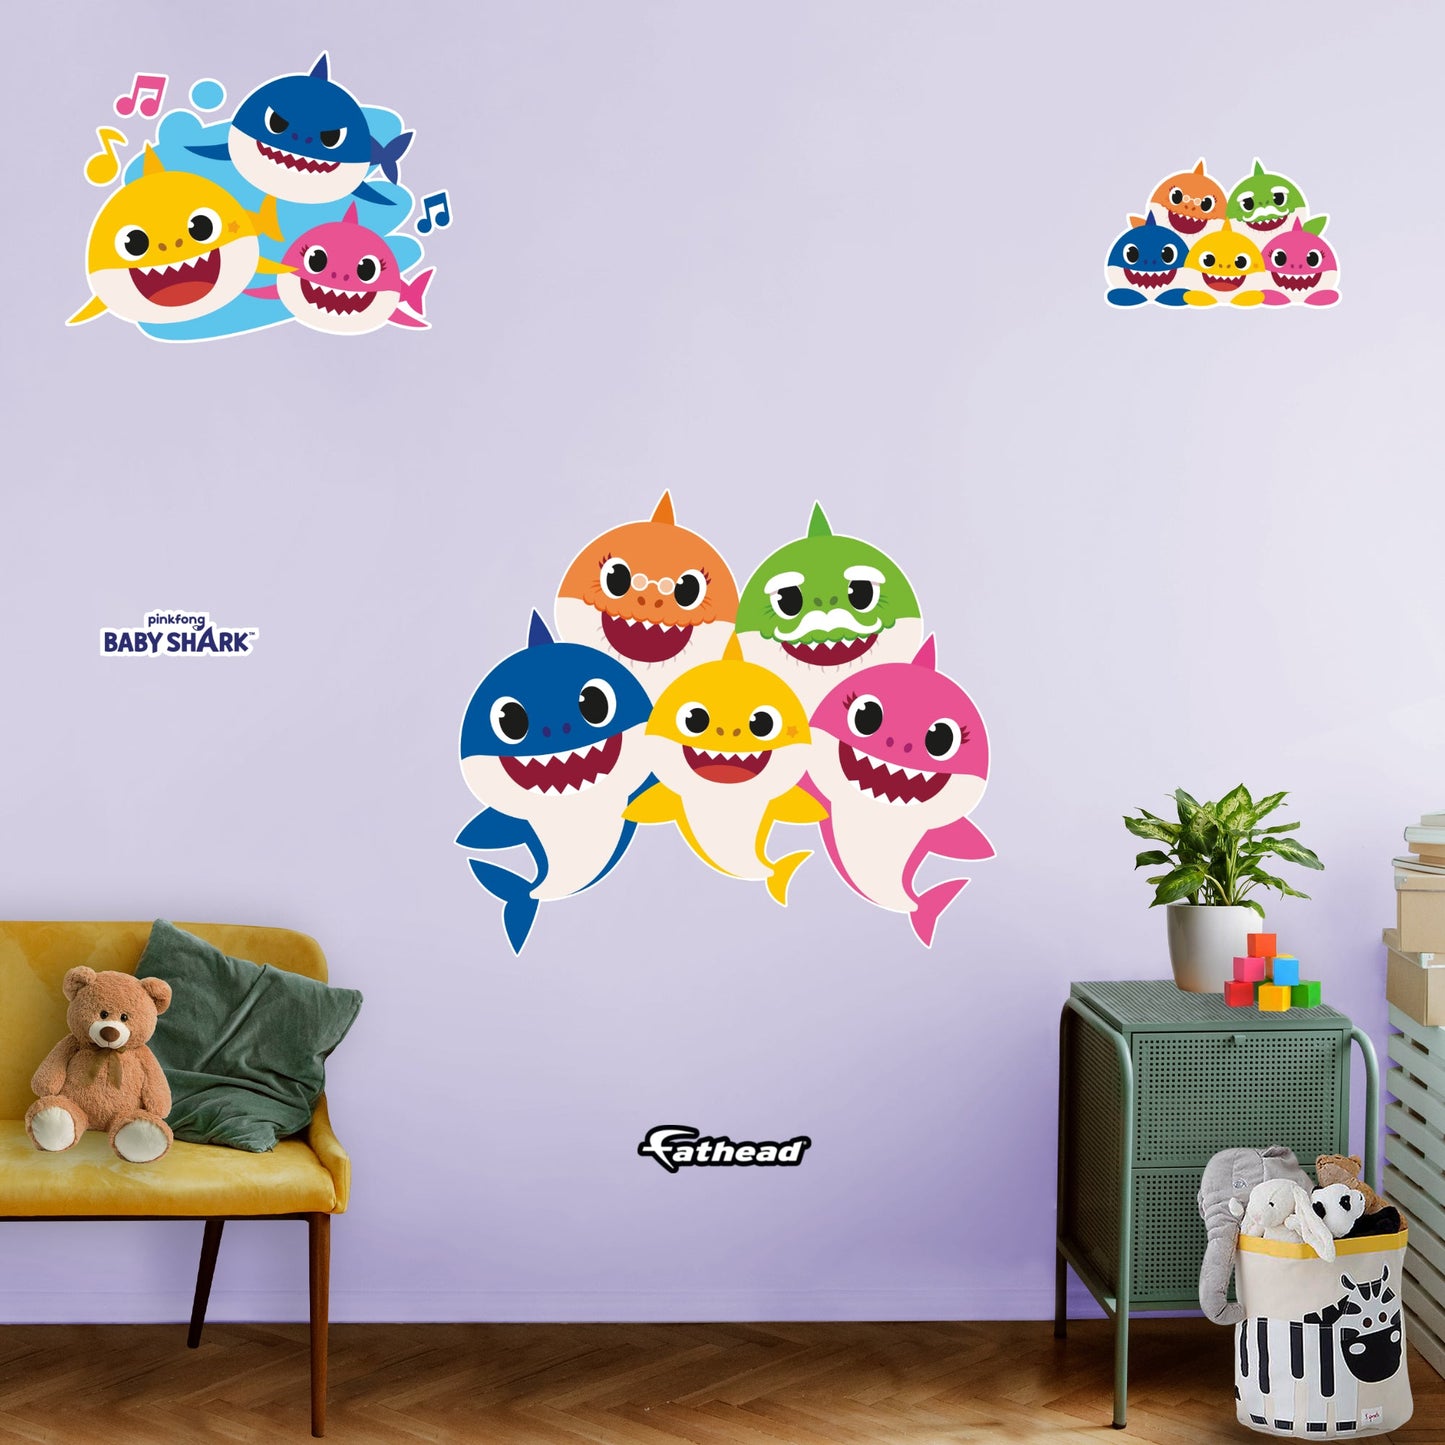 Baby Shark: Family RealBig - Officially Licensed Nickelodeon Removable Adhesive Decal